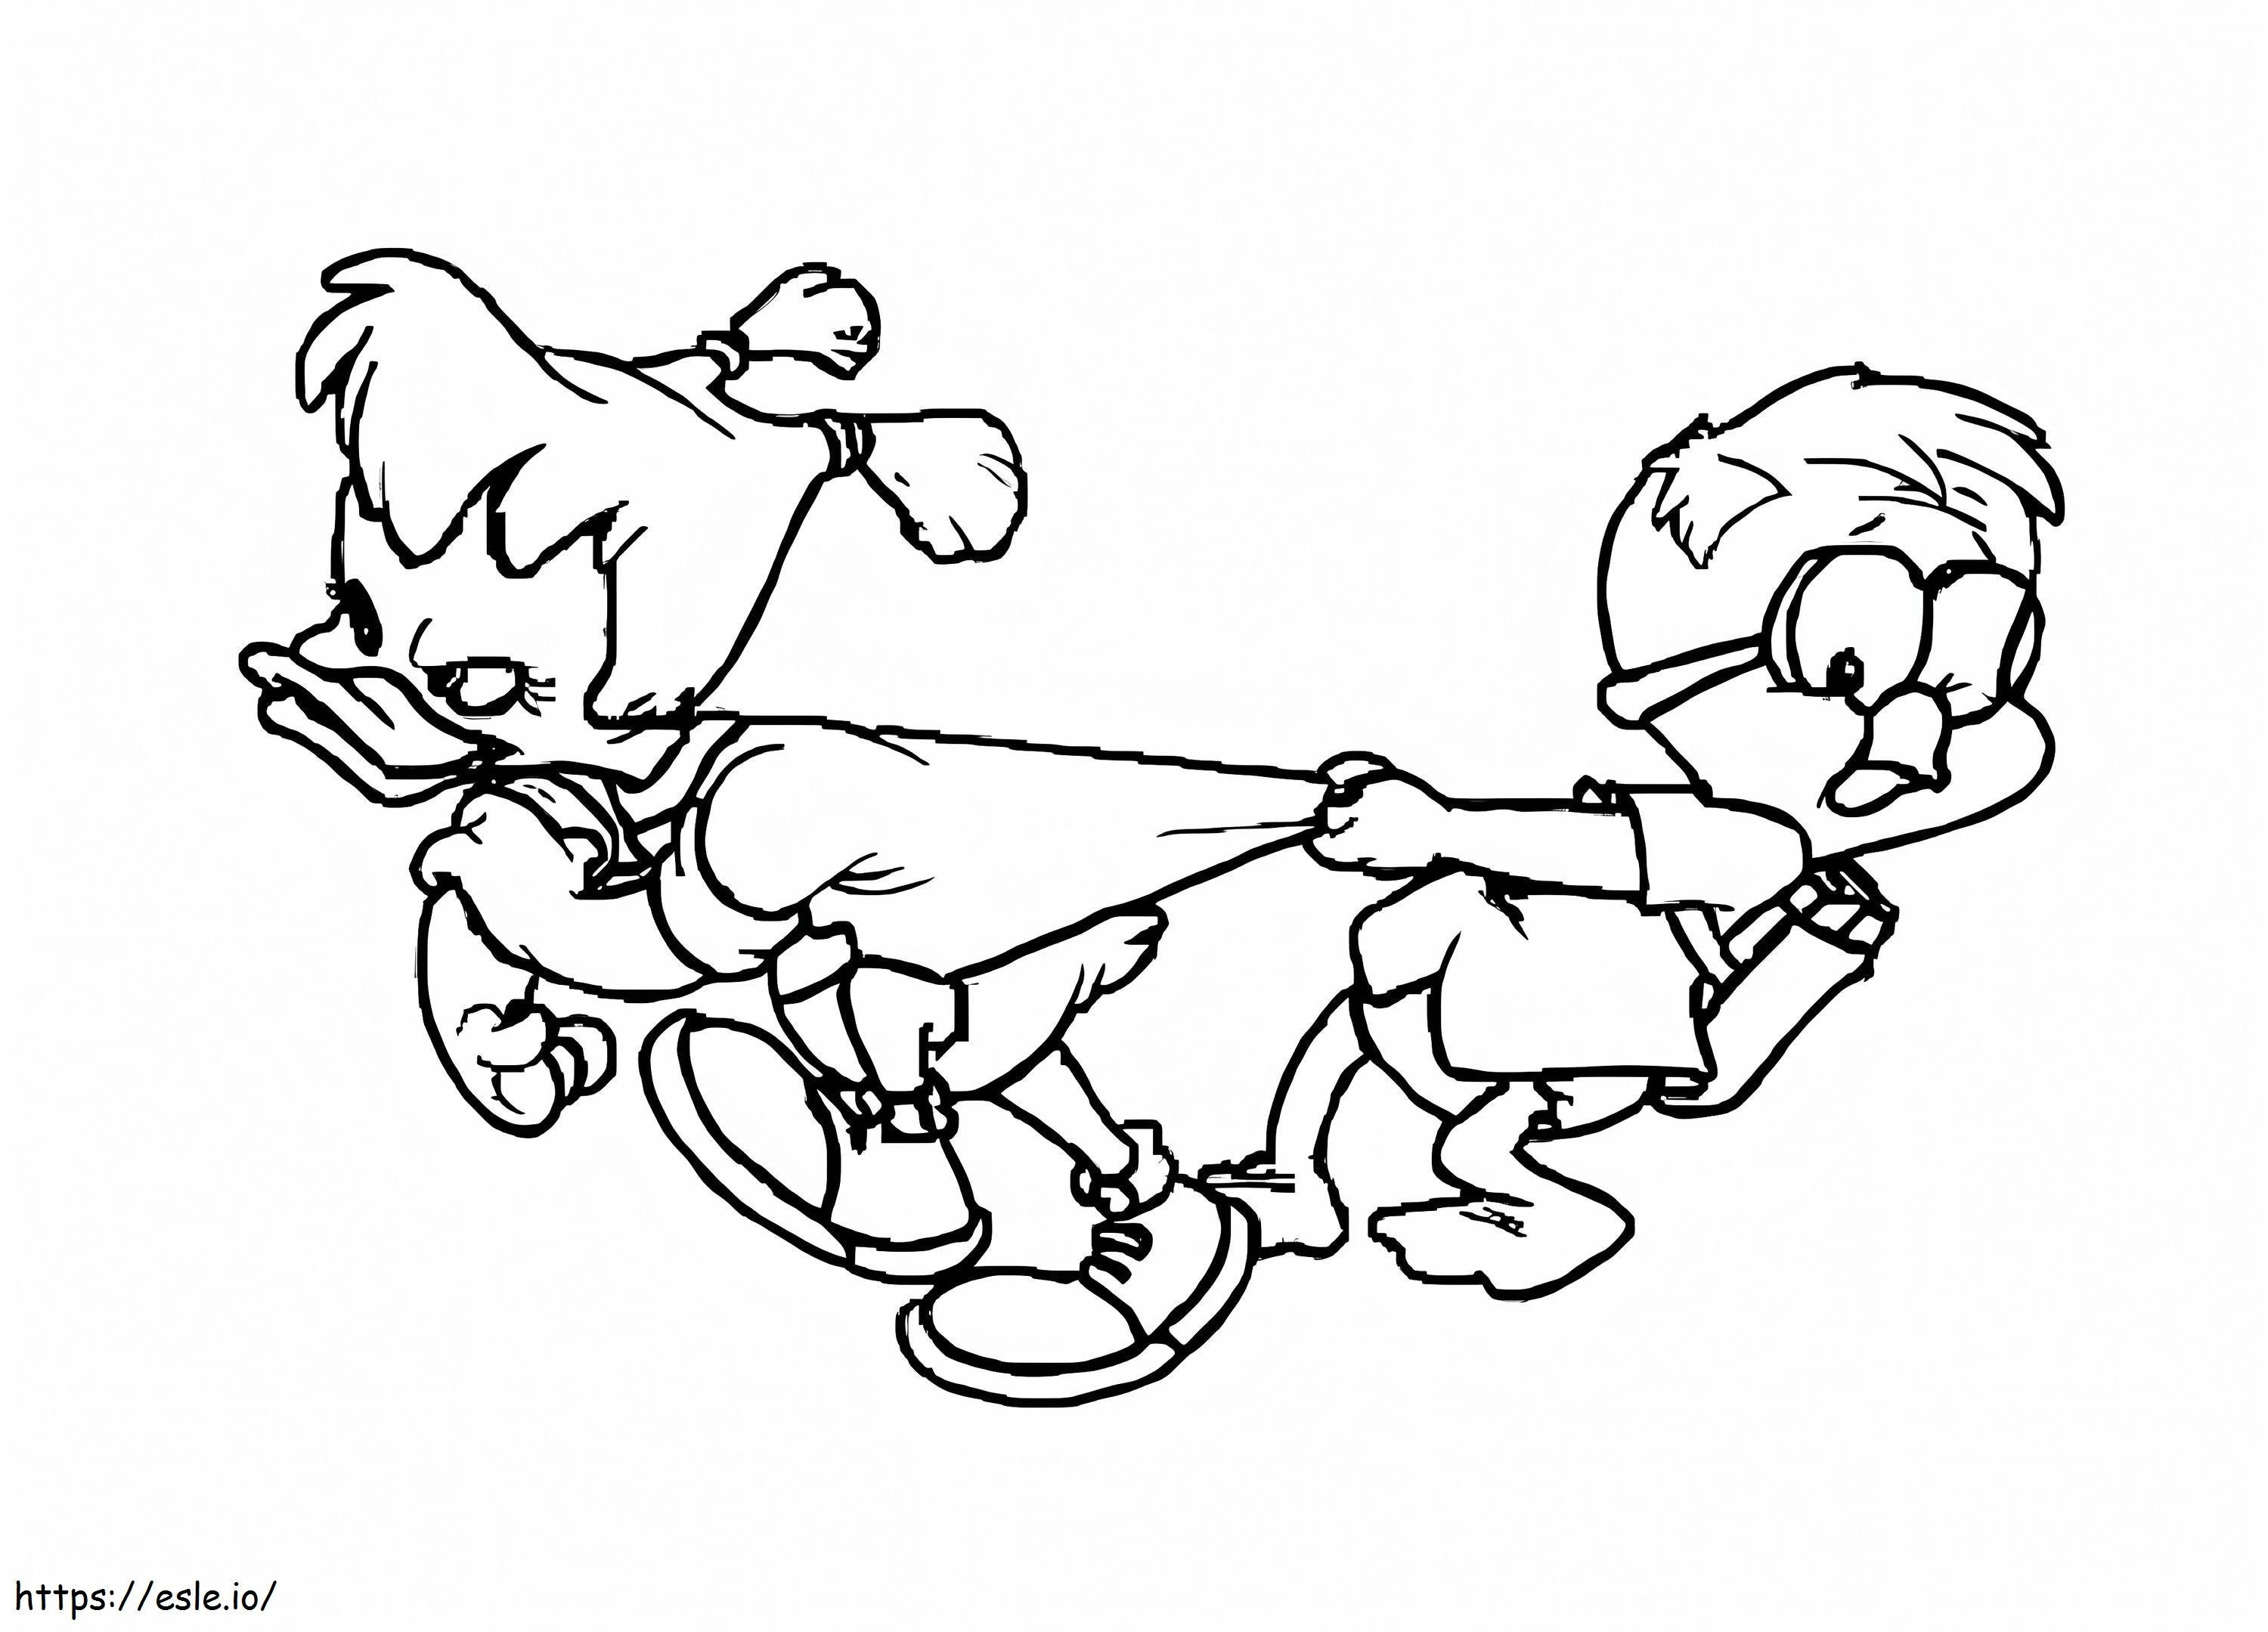 Kids From Darkwing Duck coloring page